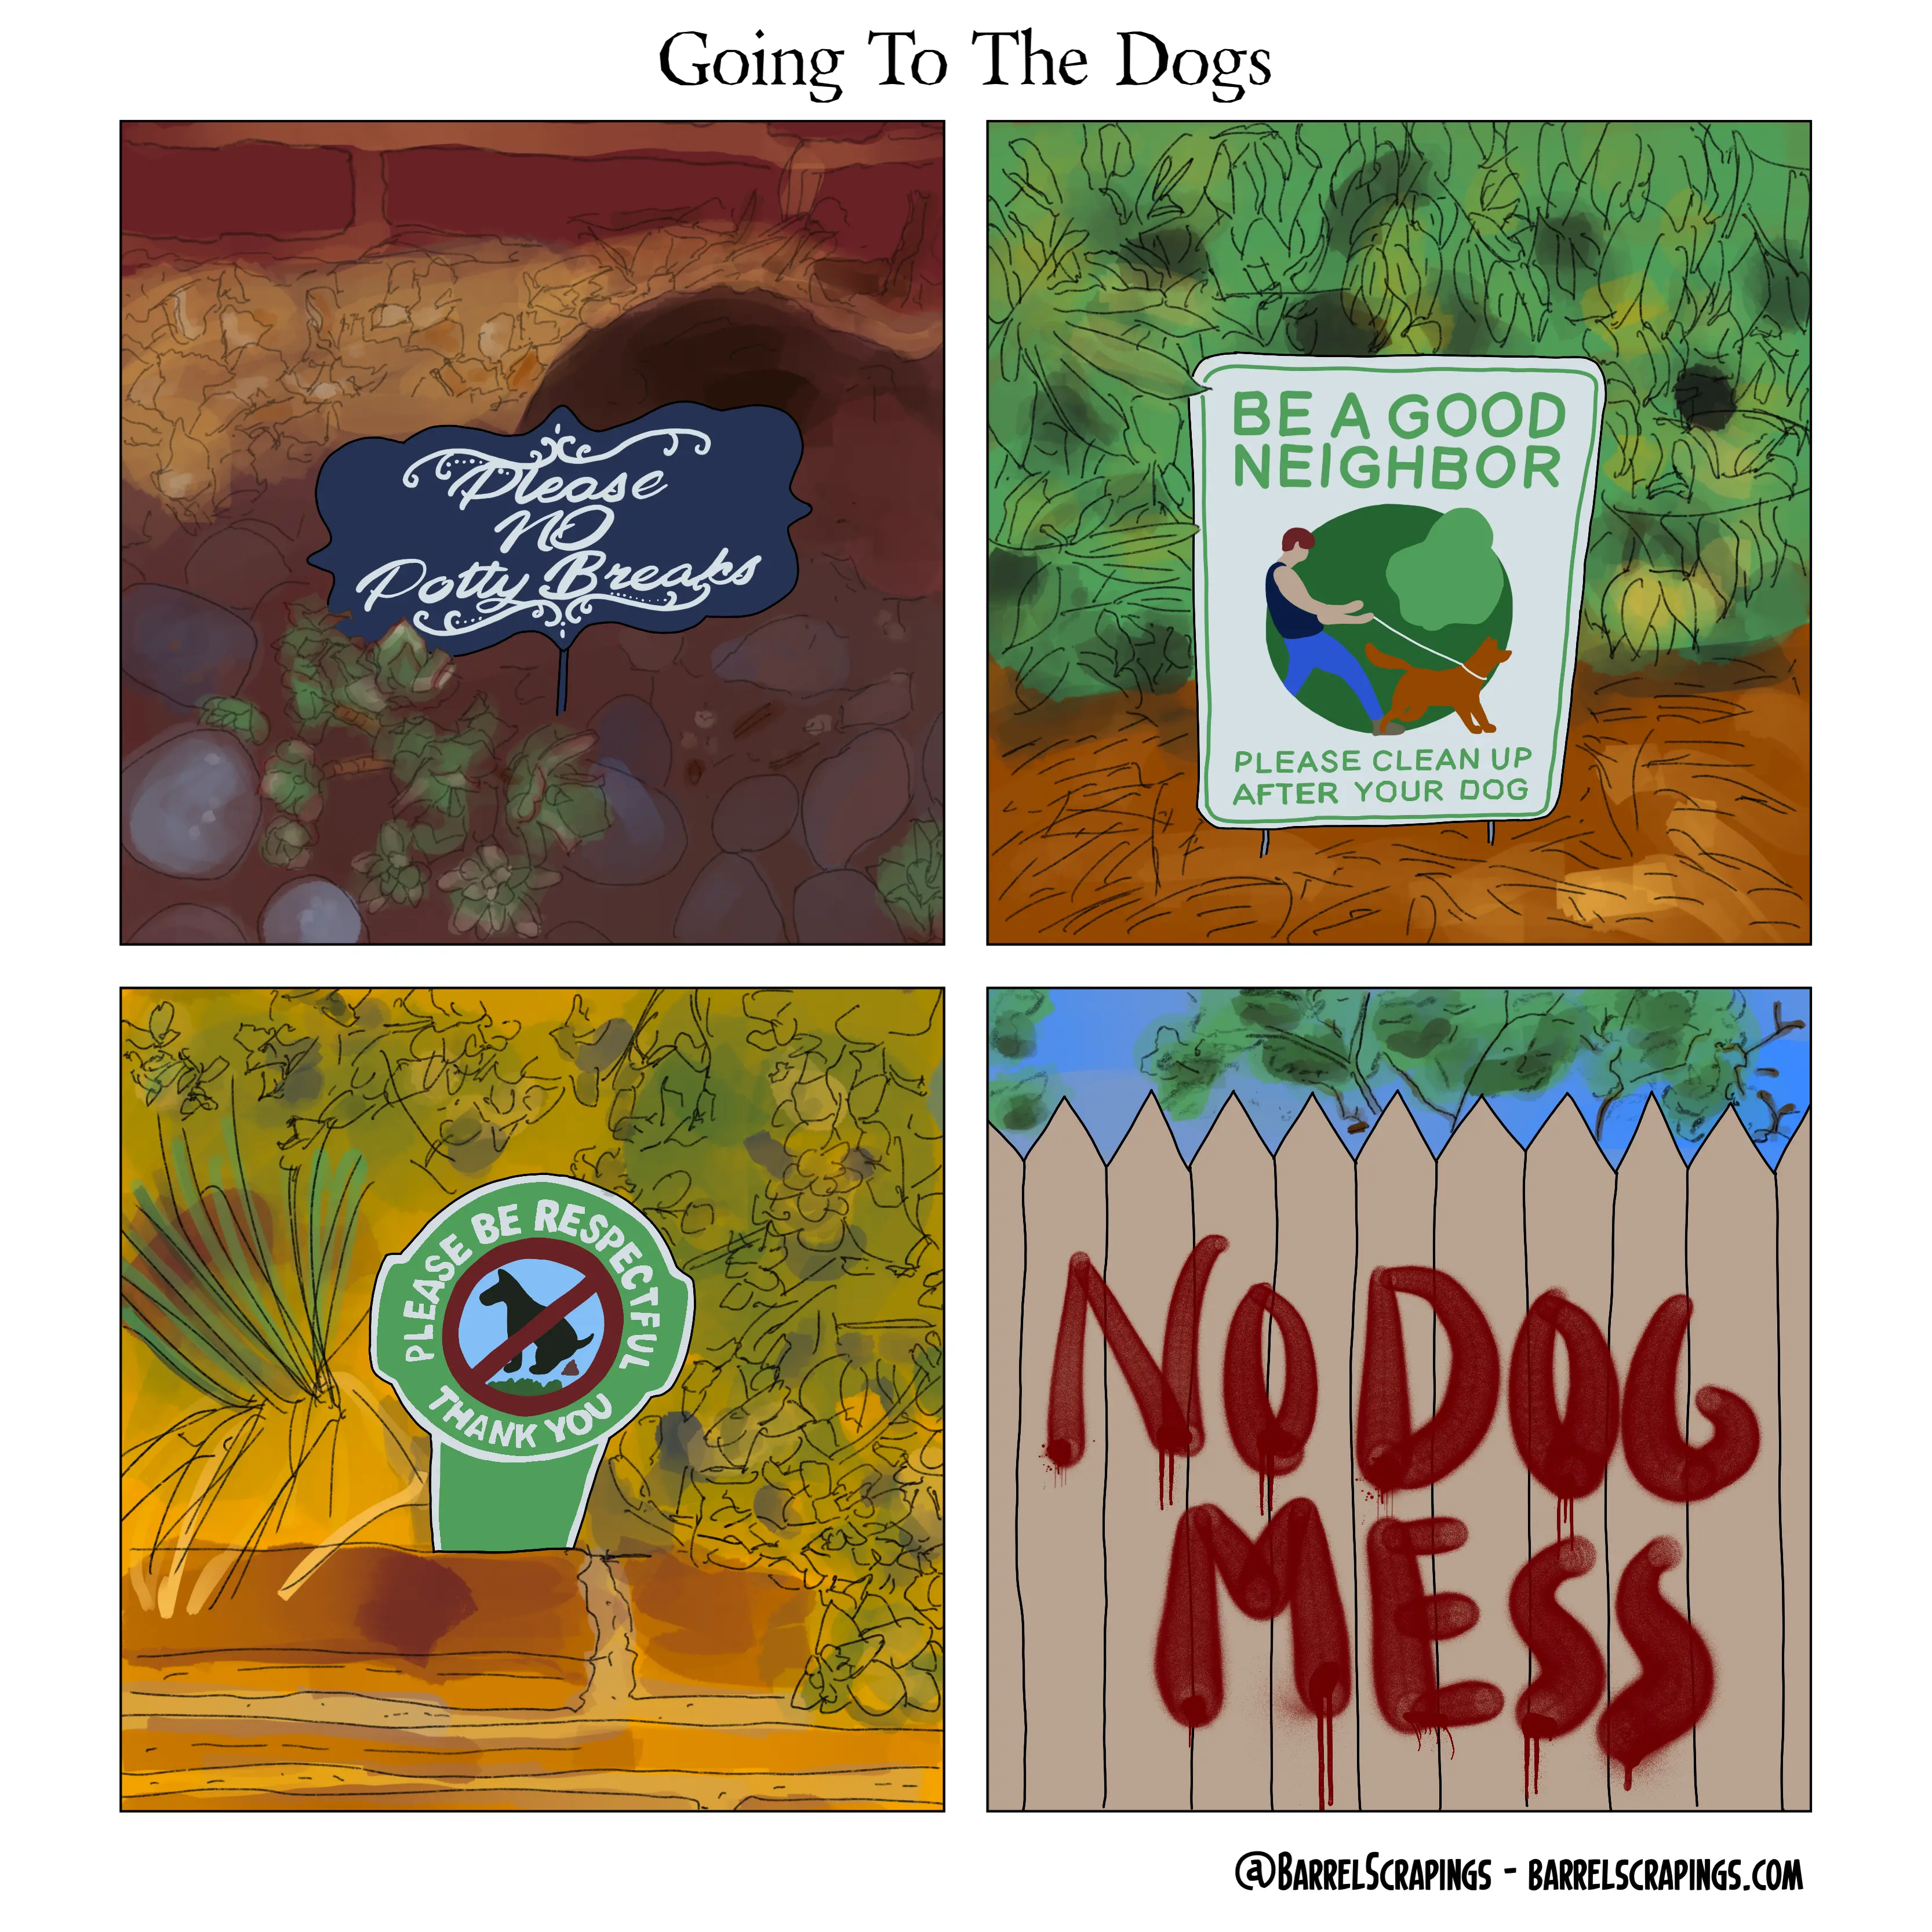 Panel 1: A sign with delicate cursive amongst plants saying "Please NO potty breaks". Panel 2: A sign with the text "Be a good neighbor: Please clean up after your dog". Panel 3: A sign with a picture of a dog pooping, crossed out, saying "Please be respectful. Thank you. Panel 4: A picket fence with the words "NO DOG MESS" in red spraypaint.